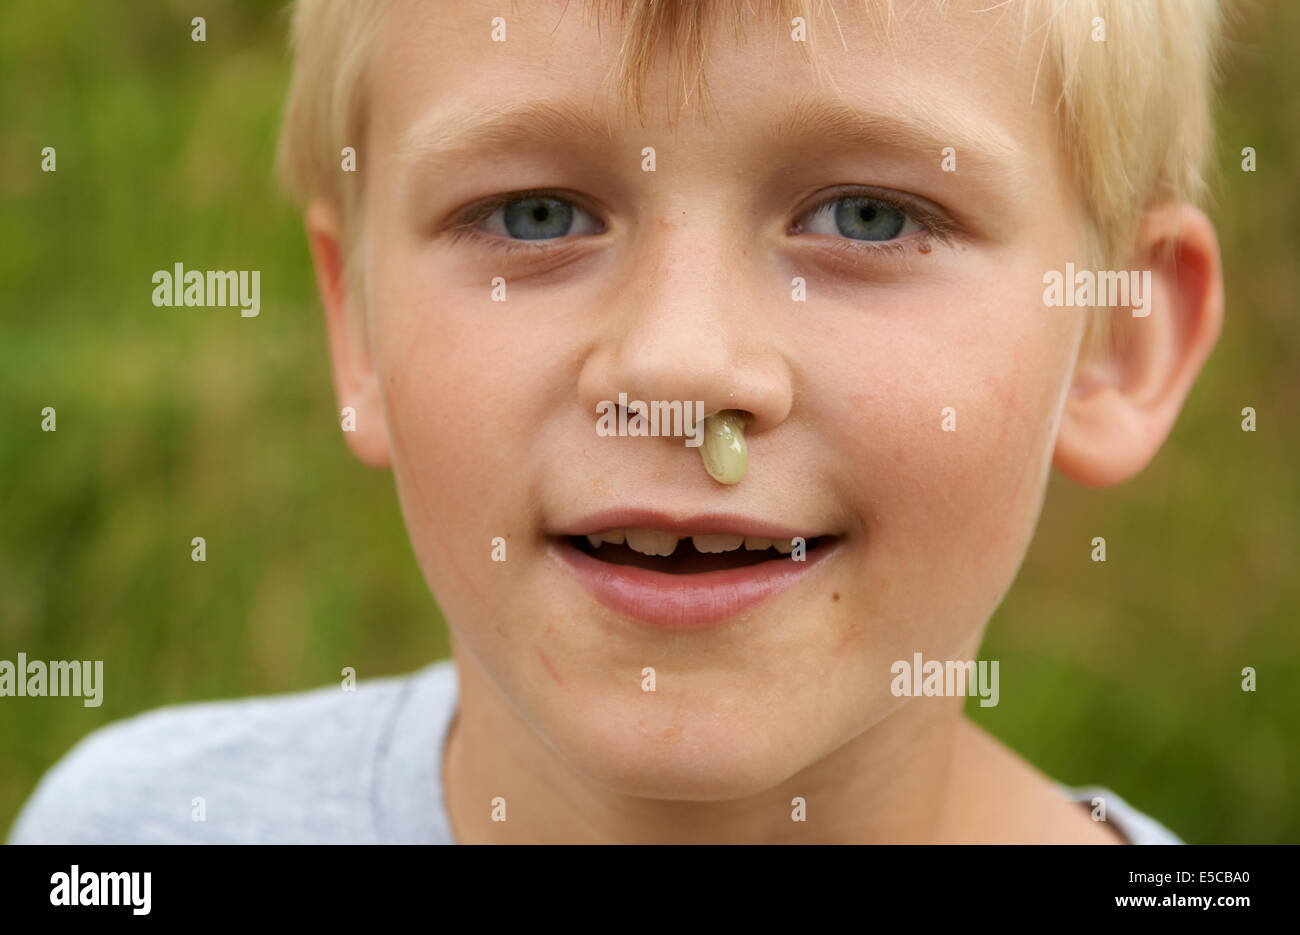 CHILD blond boy WITH RHINITIS without tissue flowing from the nose, portrait, head shot, face, detail Stock Photo